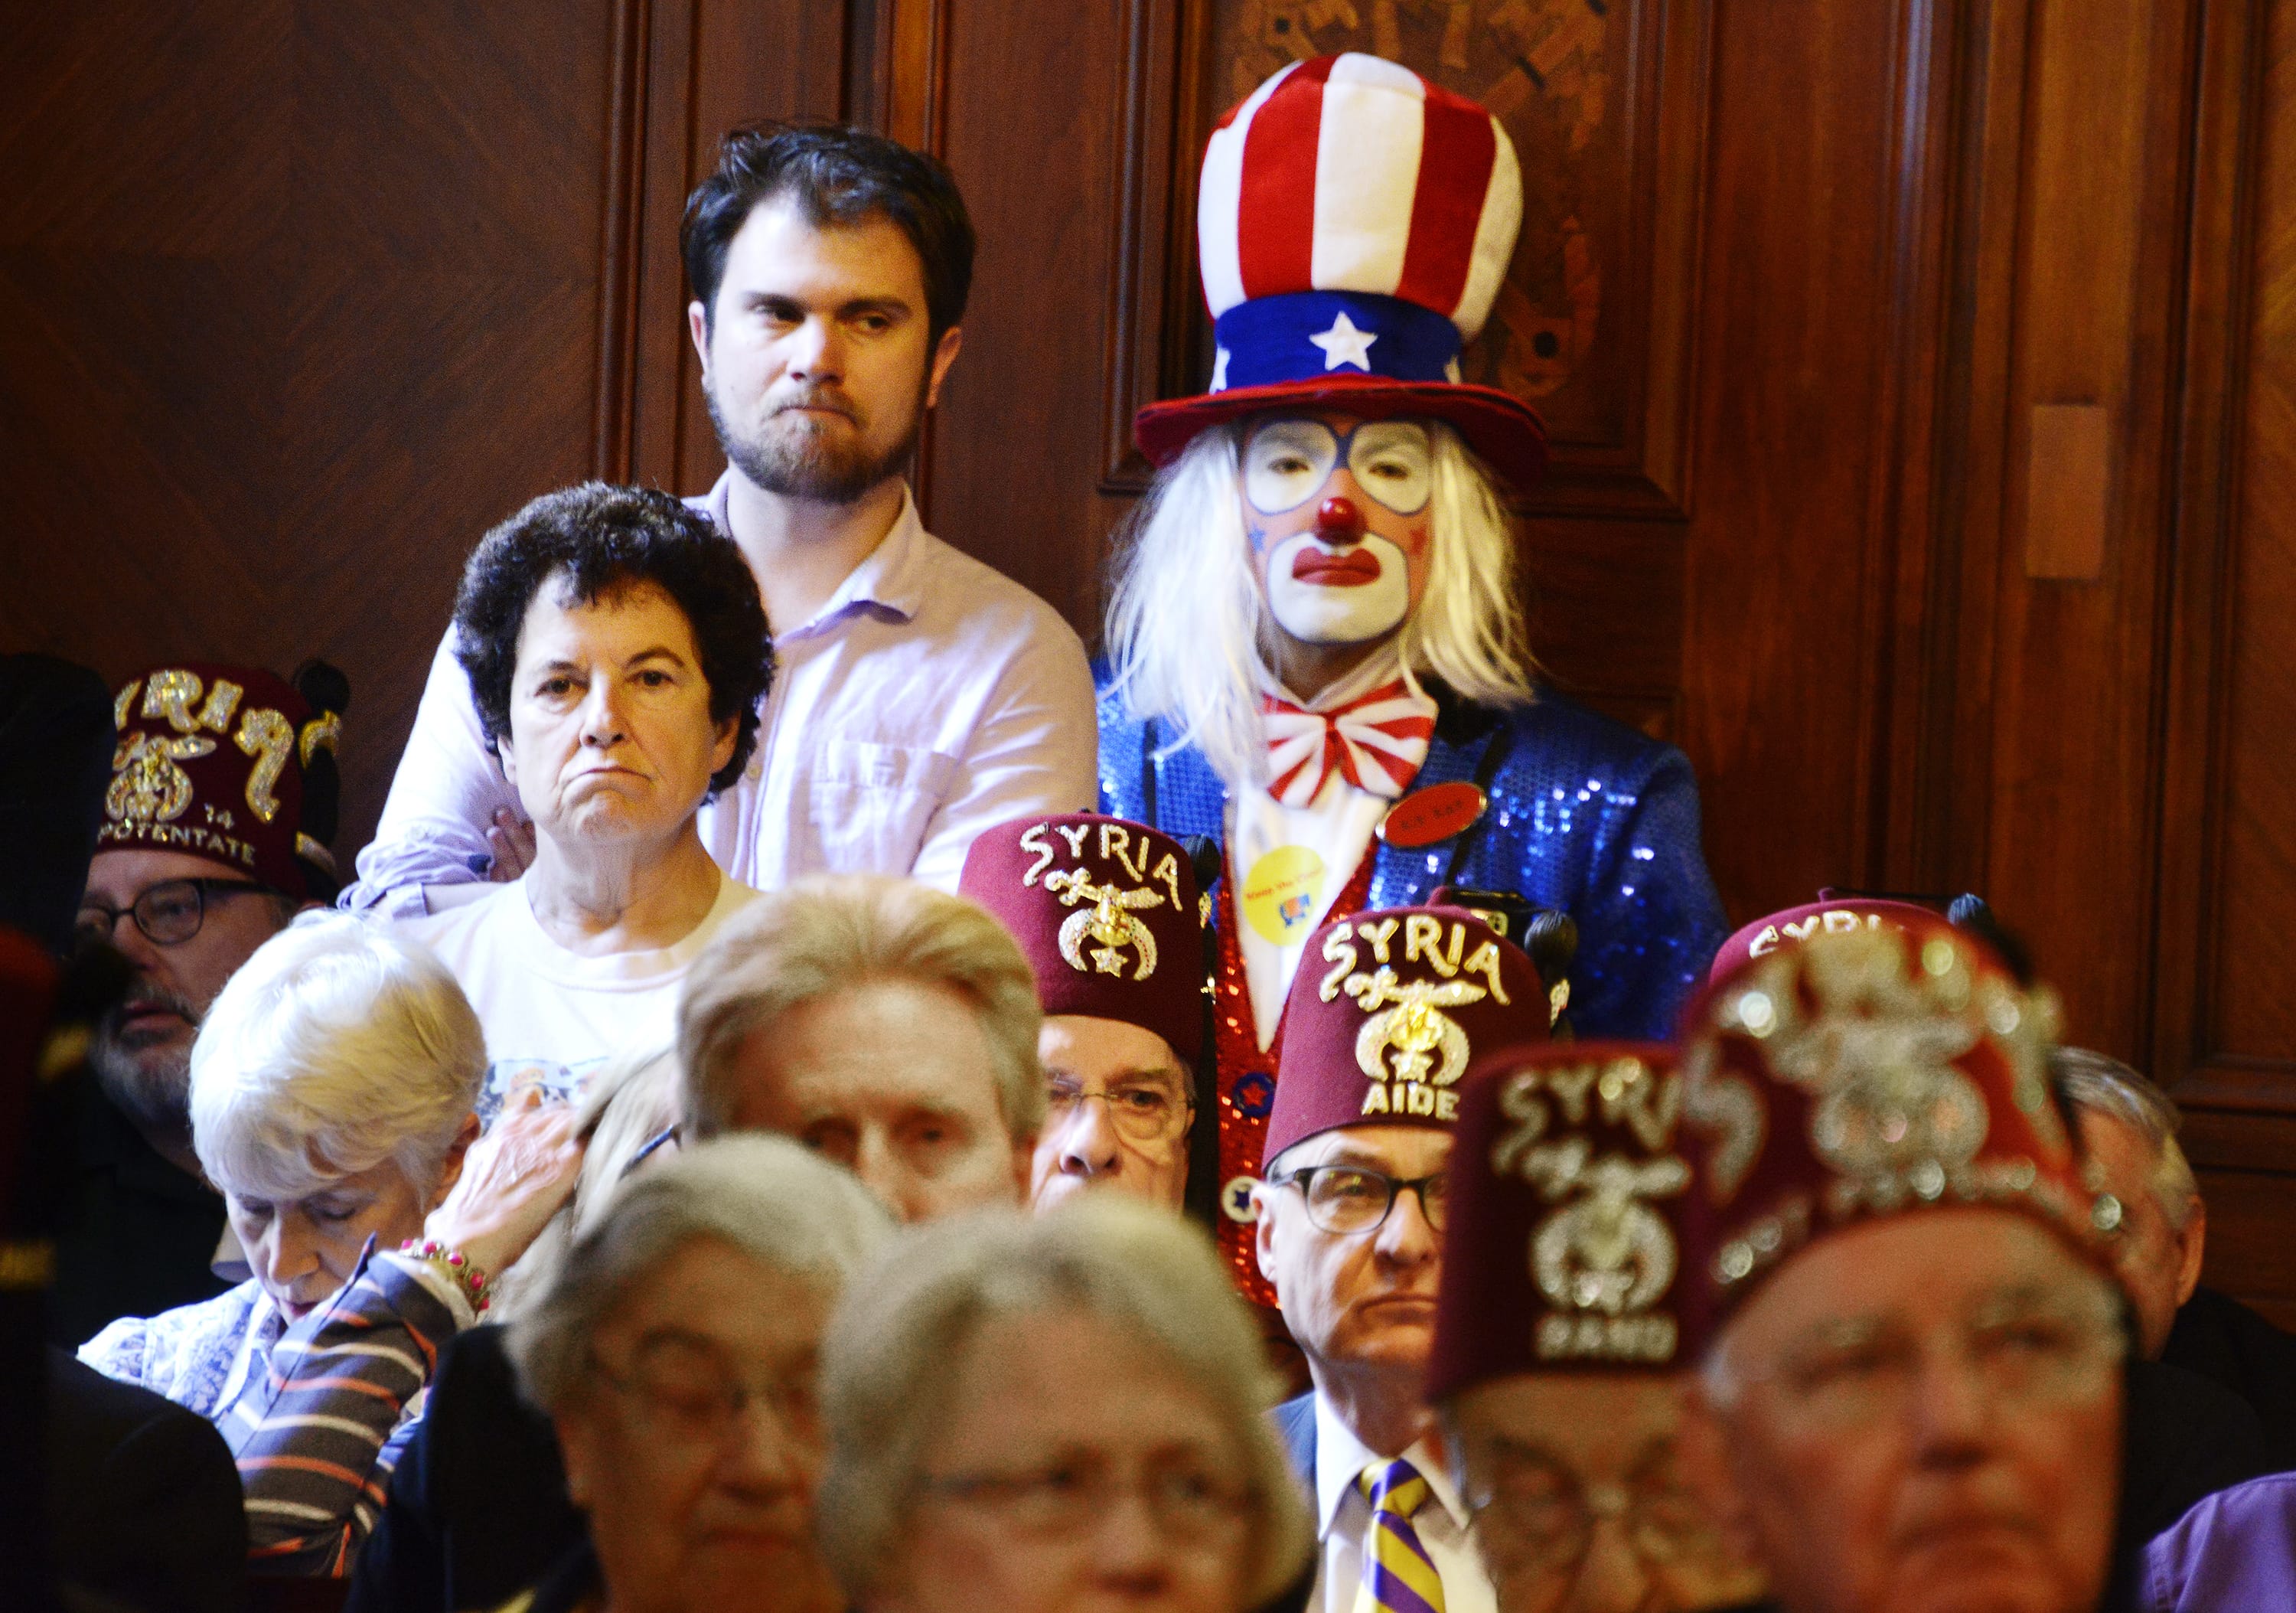 Clowns, including Jeff Cox, back, crowd the City Council chamber during a City Council hearing on a proposed wild-animal entertainment ban that would keep circuses and similar shows out of the city, Tuesday, May 24, 2016. Syria Shrine clowns also held signs outside the City-County Building begging the City Council not to enact the measure.